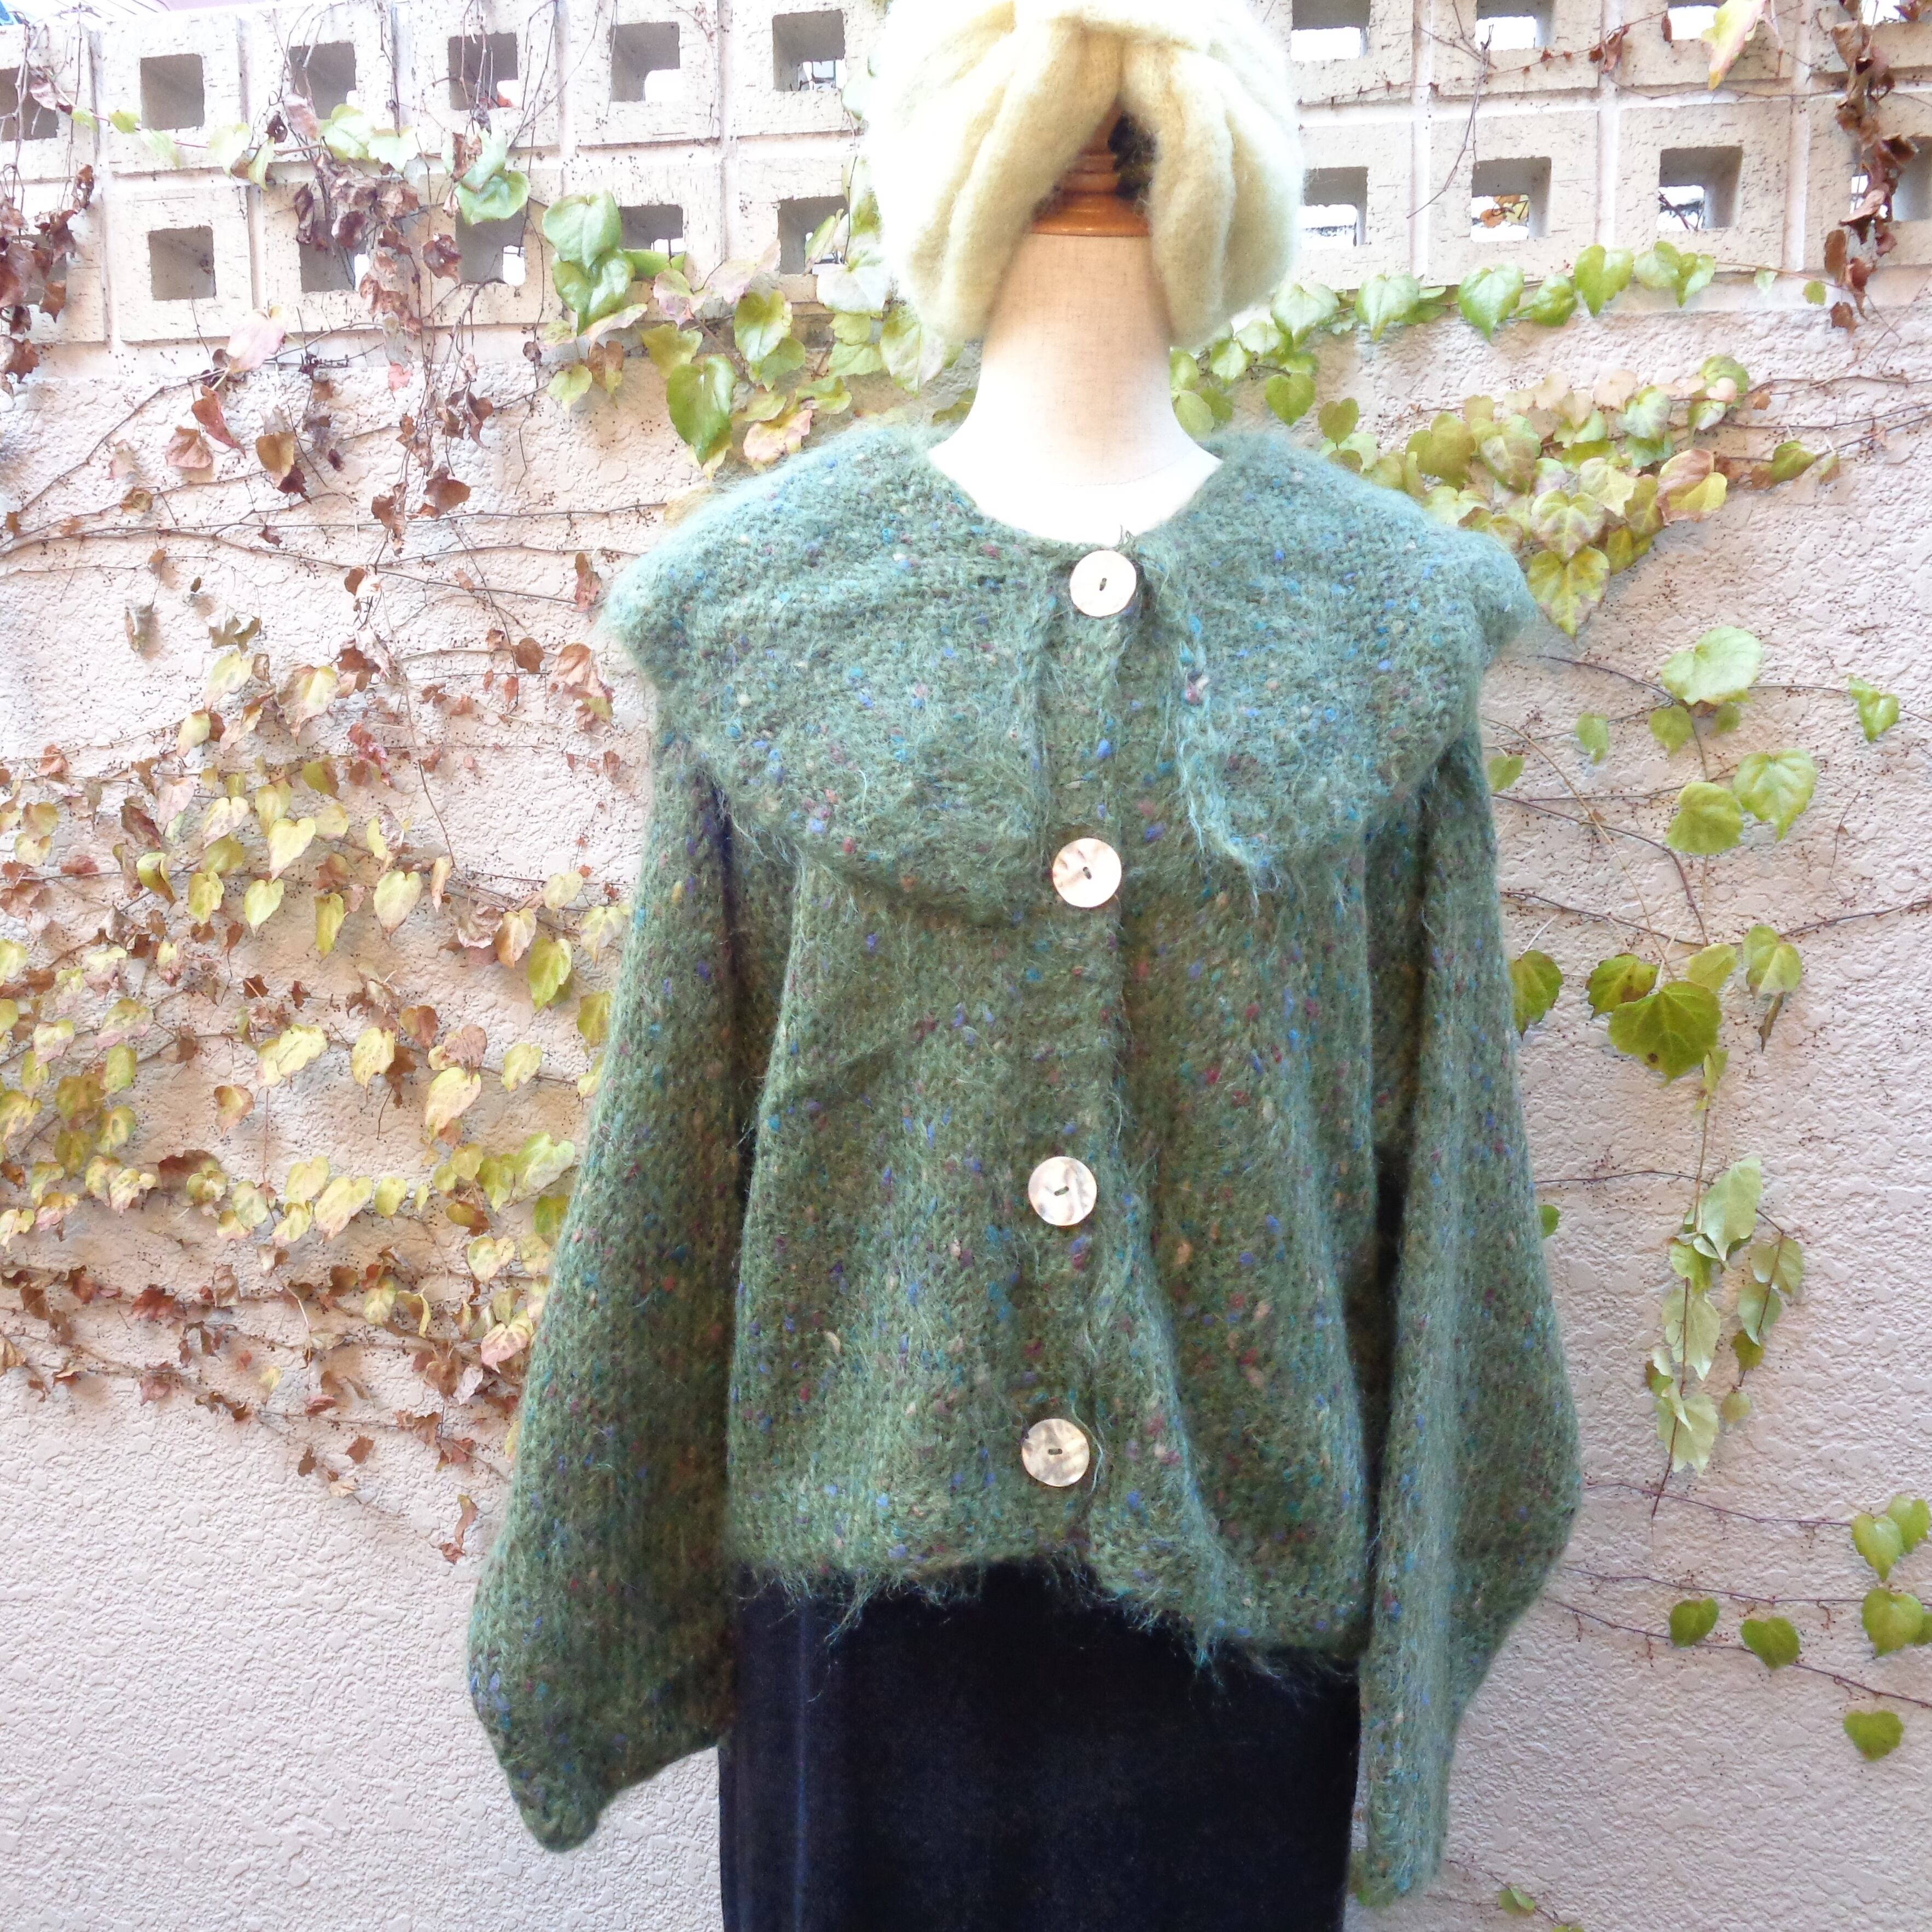 Shell button mohair cardigan／シェルボタン モヘア カーディガン | BIG TIME ｜ヴィンテージ 古着  BIGTIME（ビッグタイム） powered by BASE